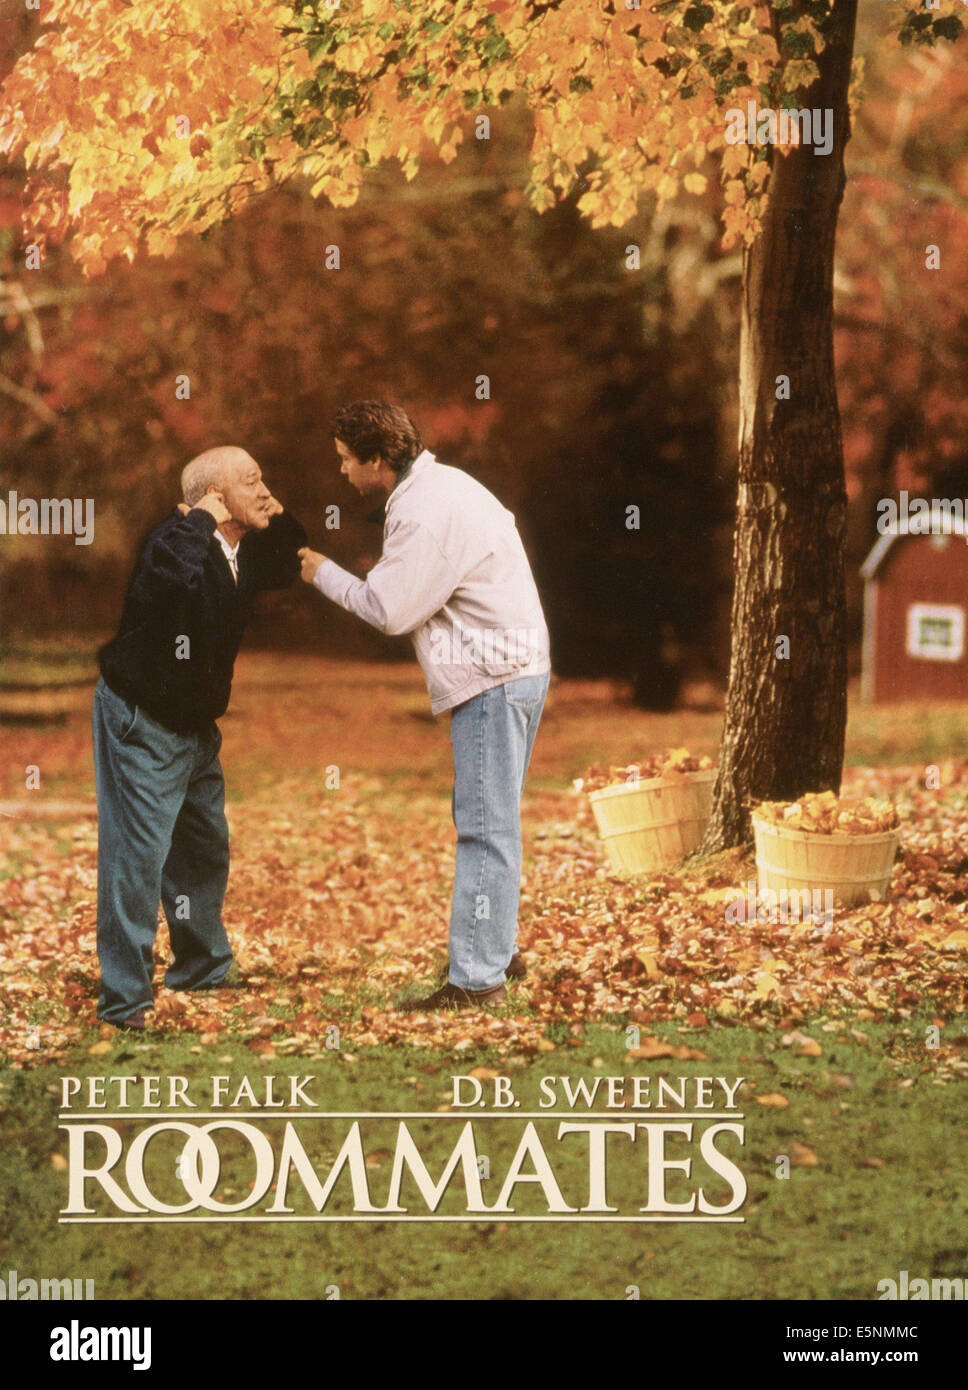 ROOMMATES, US poster, from left: Peter Falk, D.B. Sweeney, 1995, © Buena Vista/courtesy Everett Collection Stock Photo